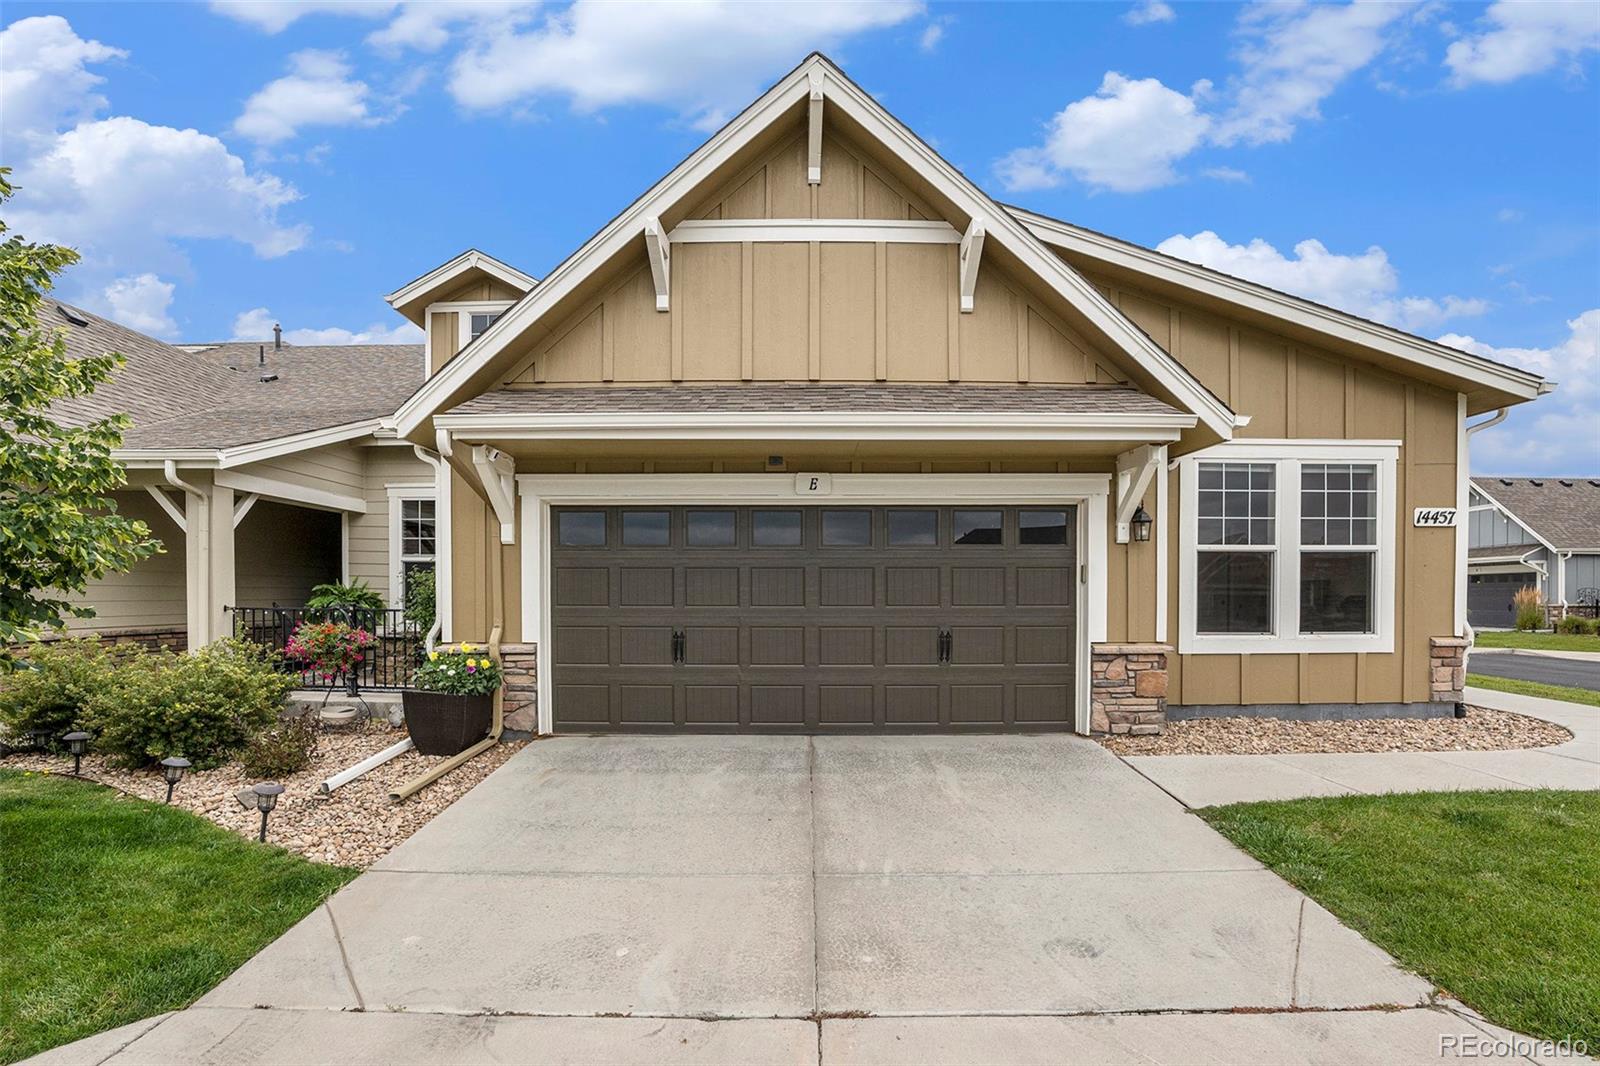 14457 W 88th Place, arvada MLS: 8651845 Beds: 2 Baths: 2 Price: $590,000